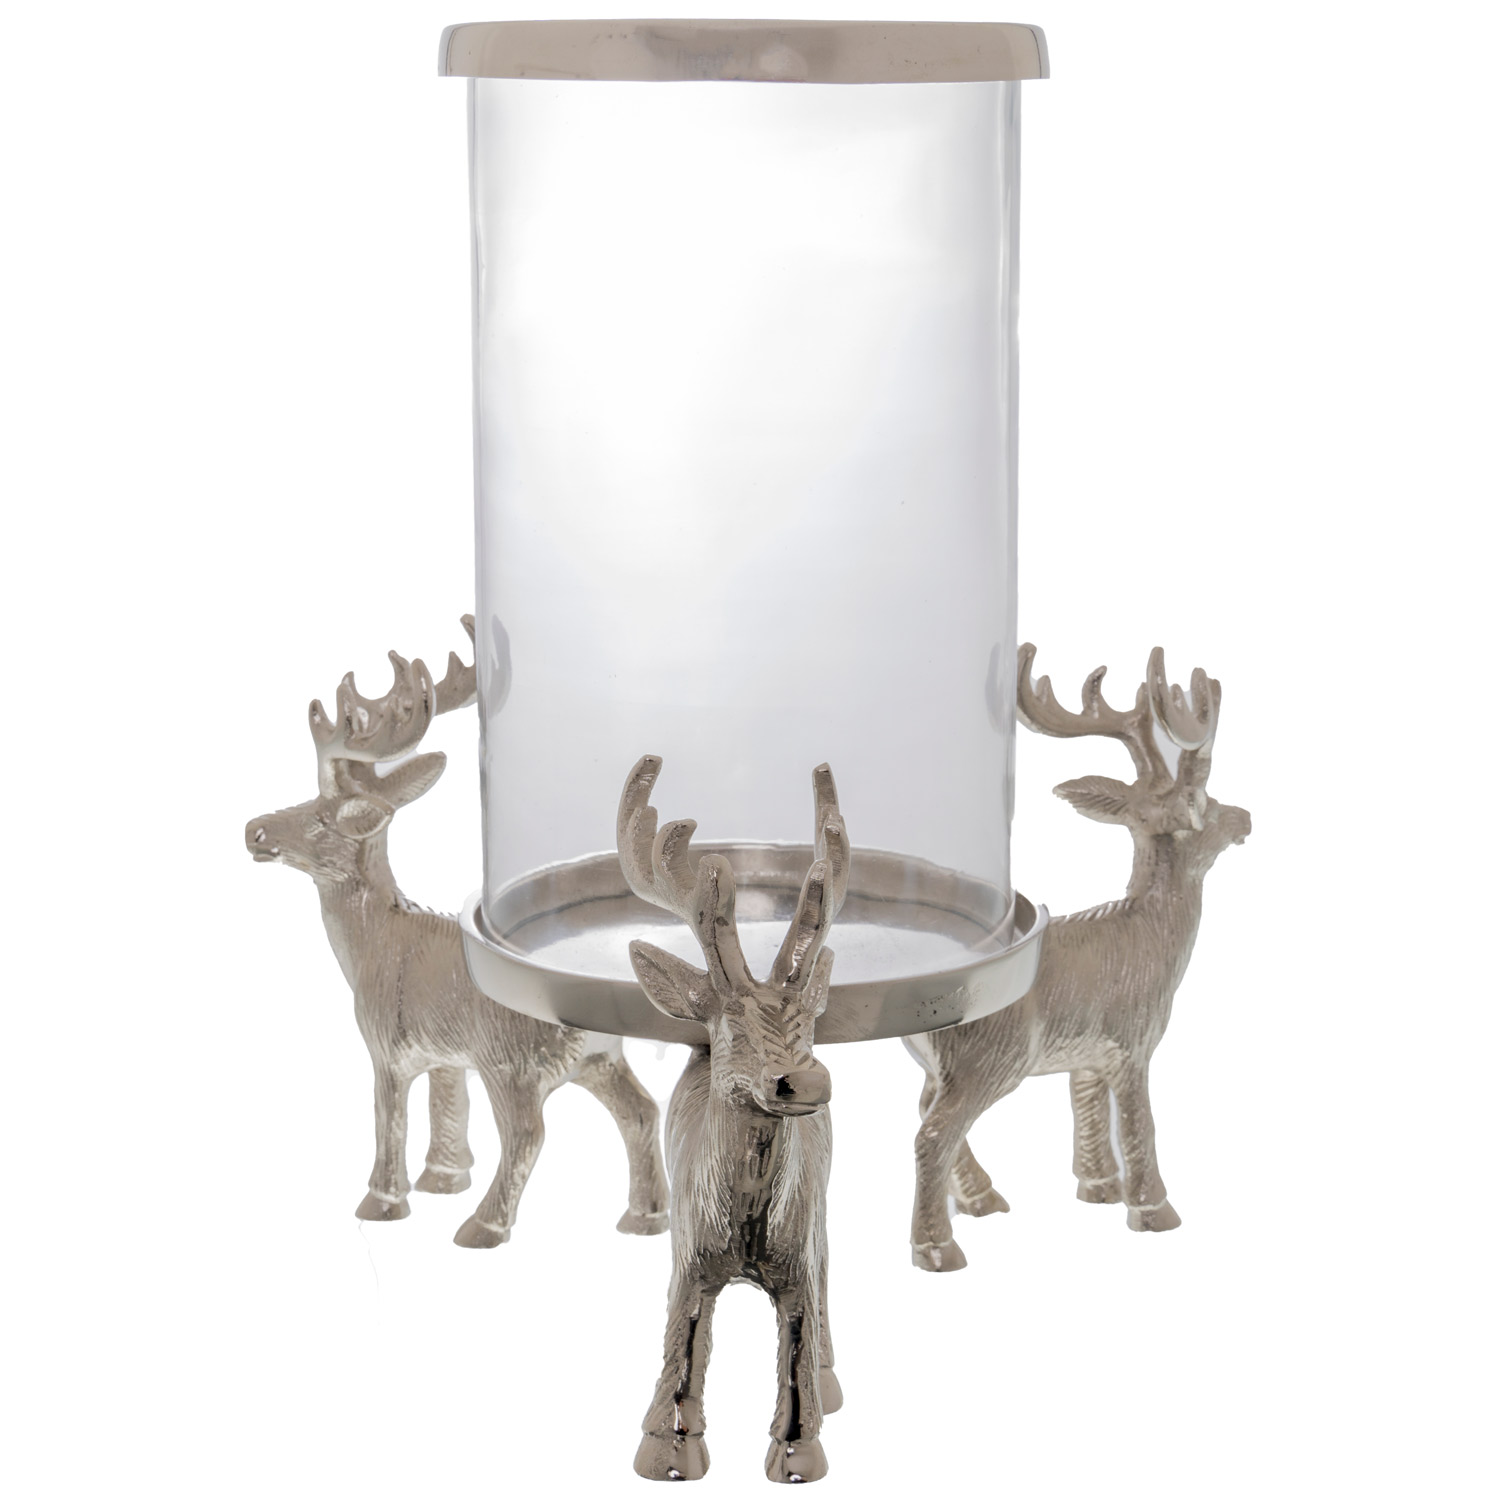 Circle Of Stags Candle Hurrican Lantern